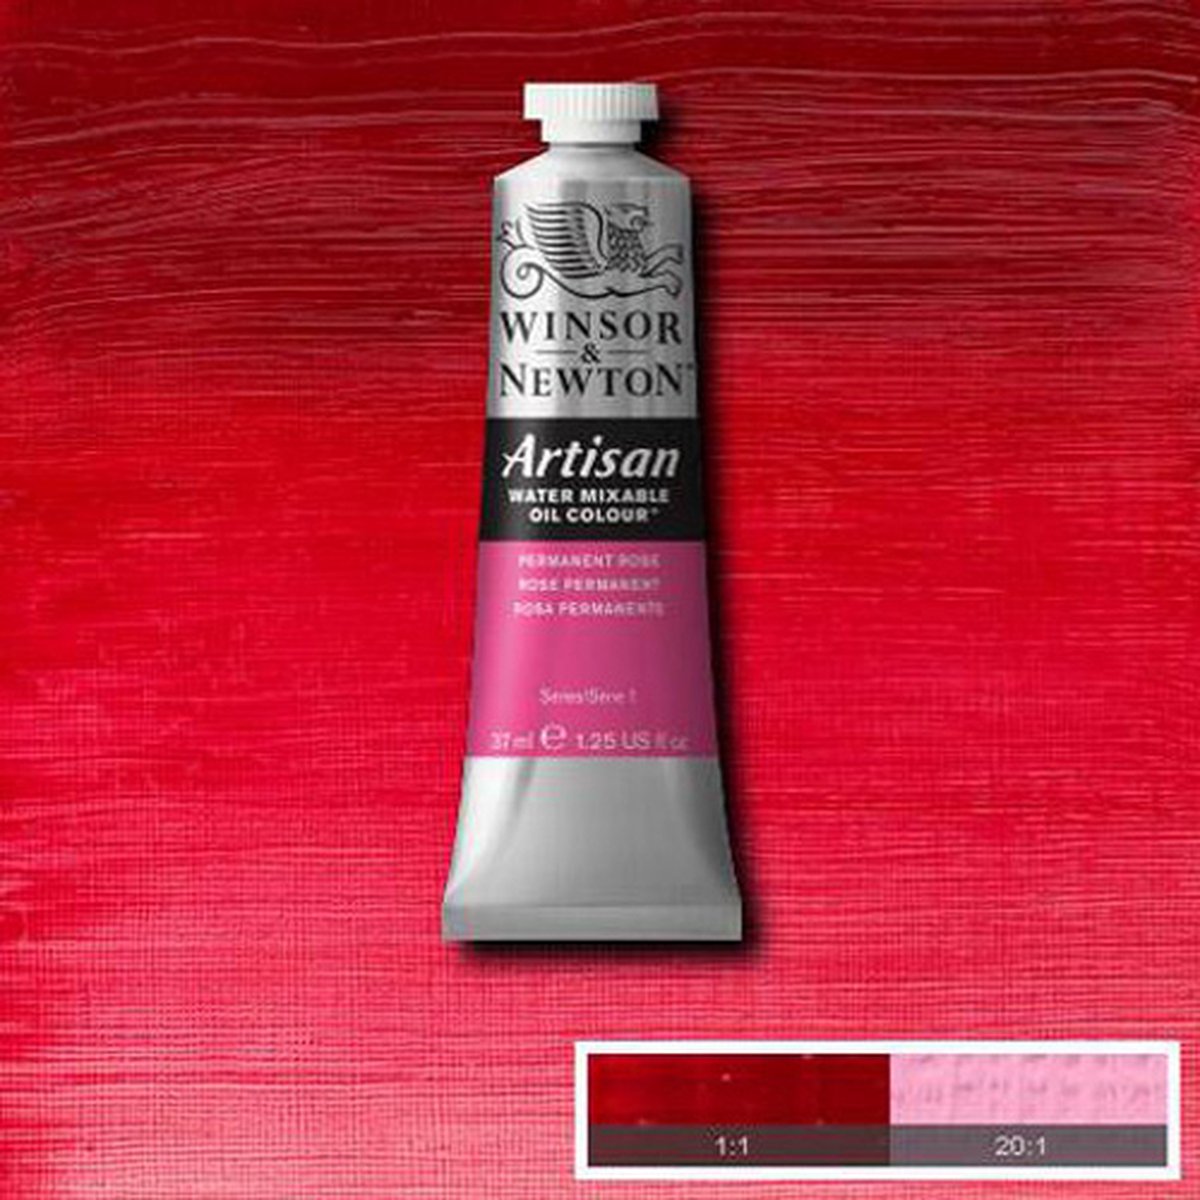 Winsor & Newton Artisan Water Mixable Oil Colour Permanent Rose 502 37ml